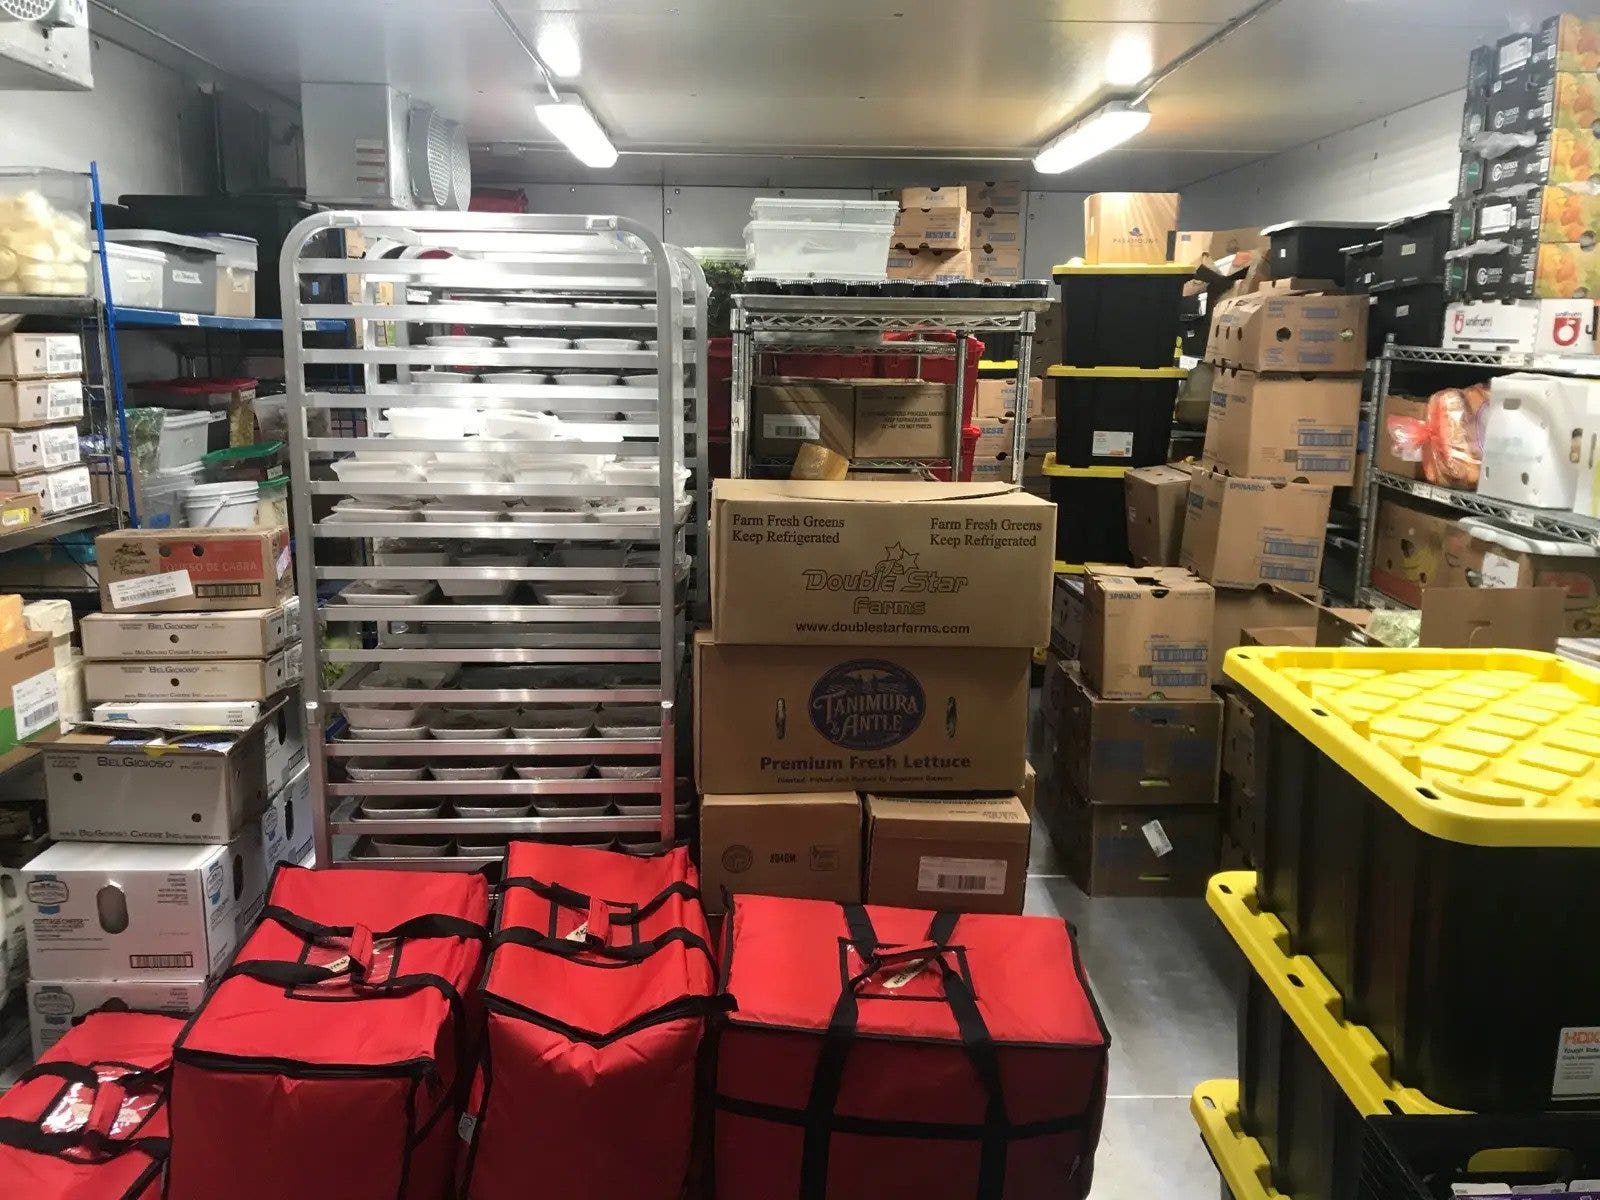 Food delivery containers in a storage room